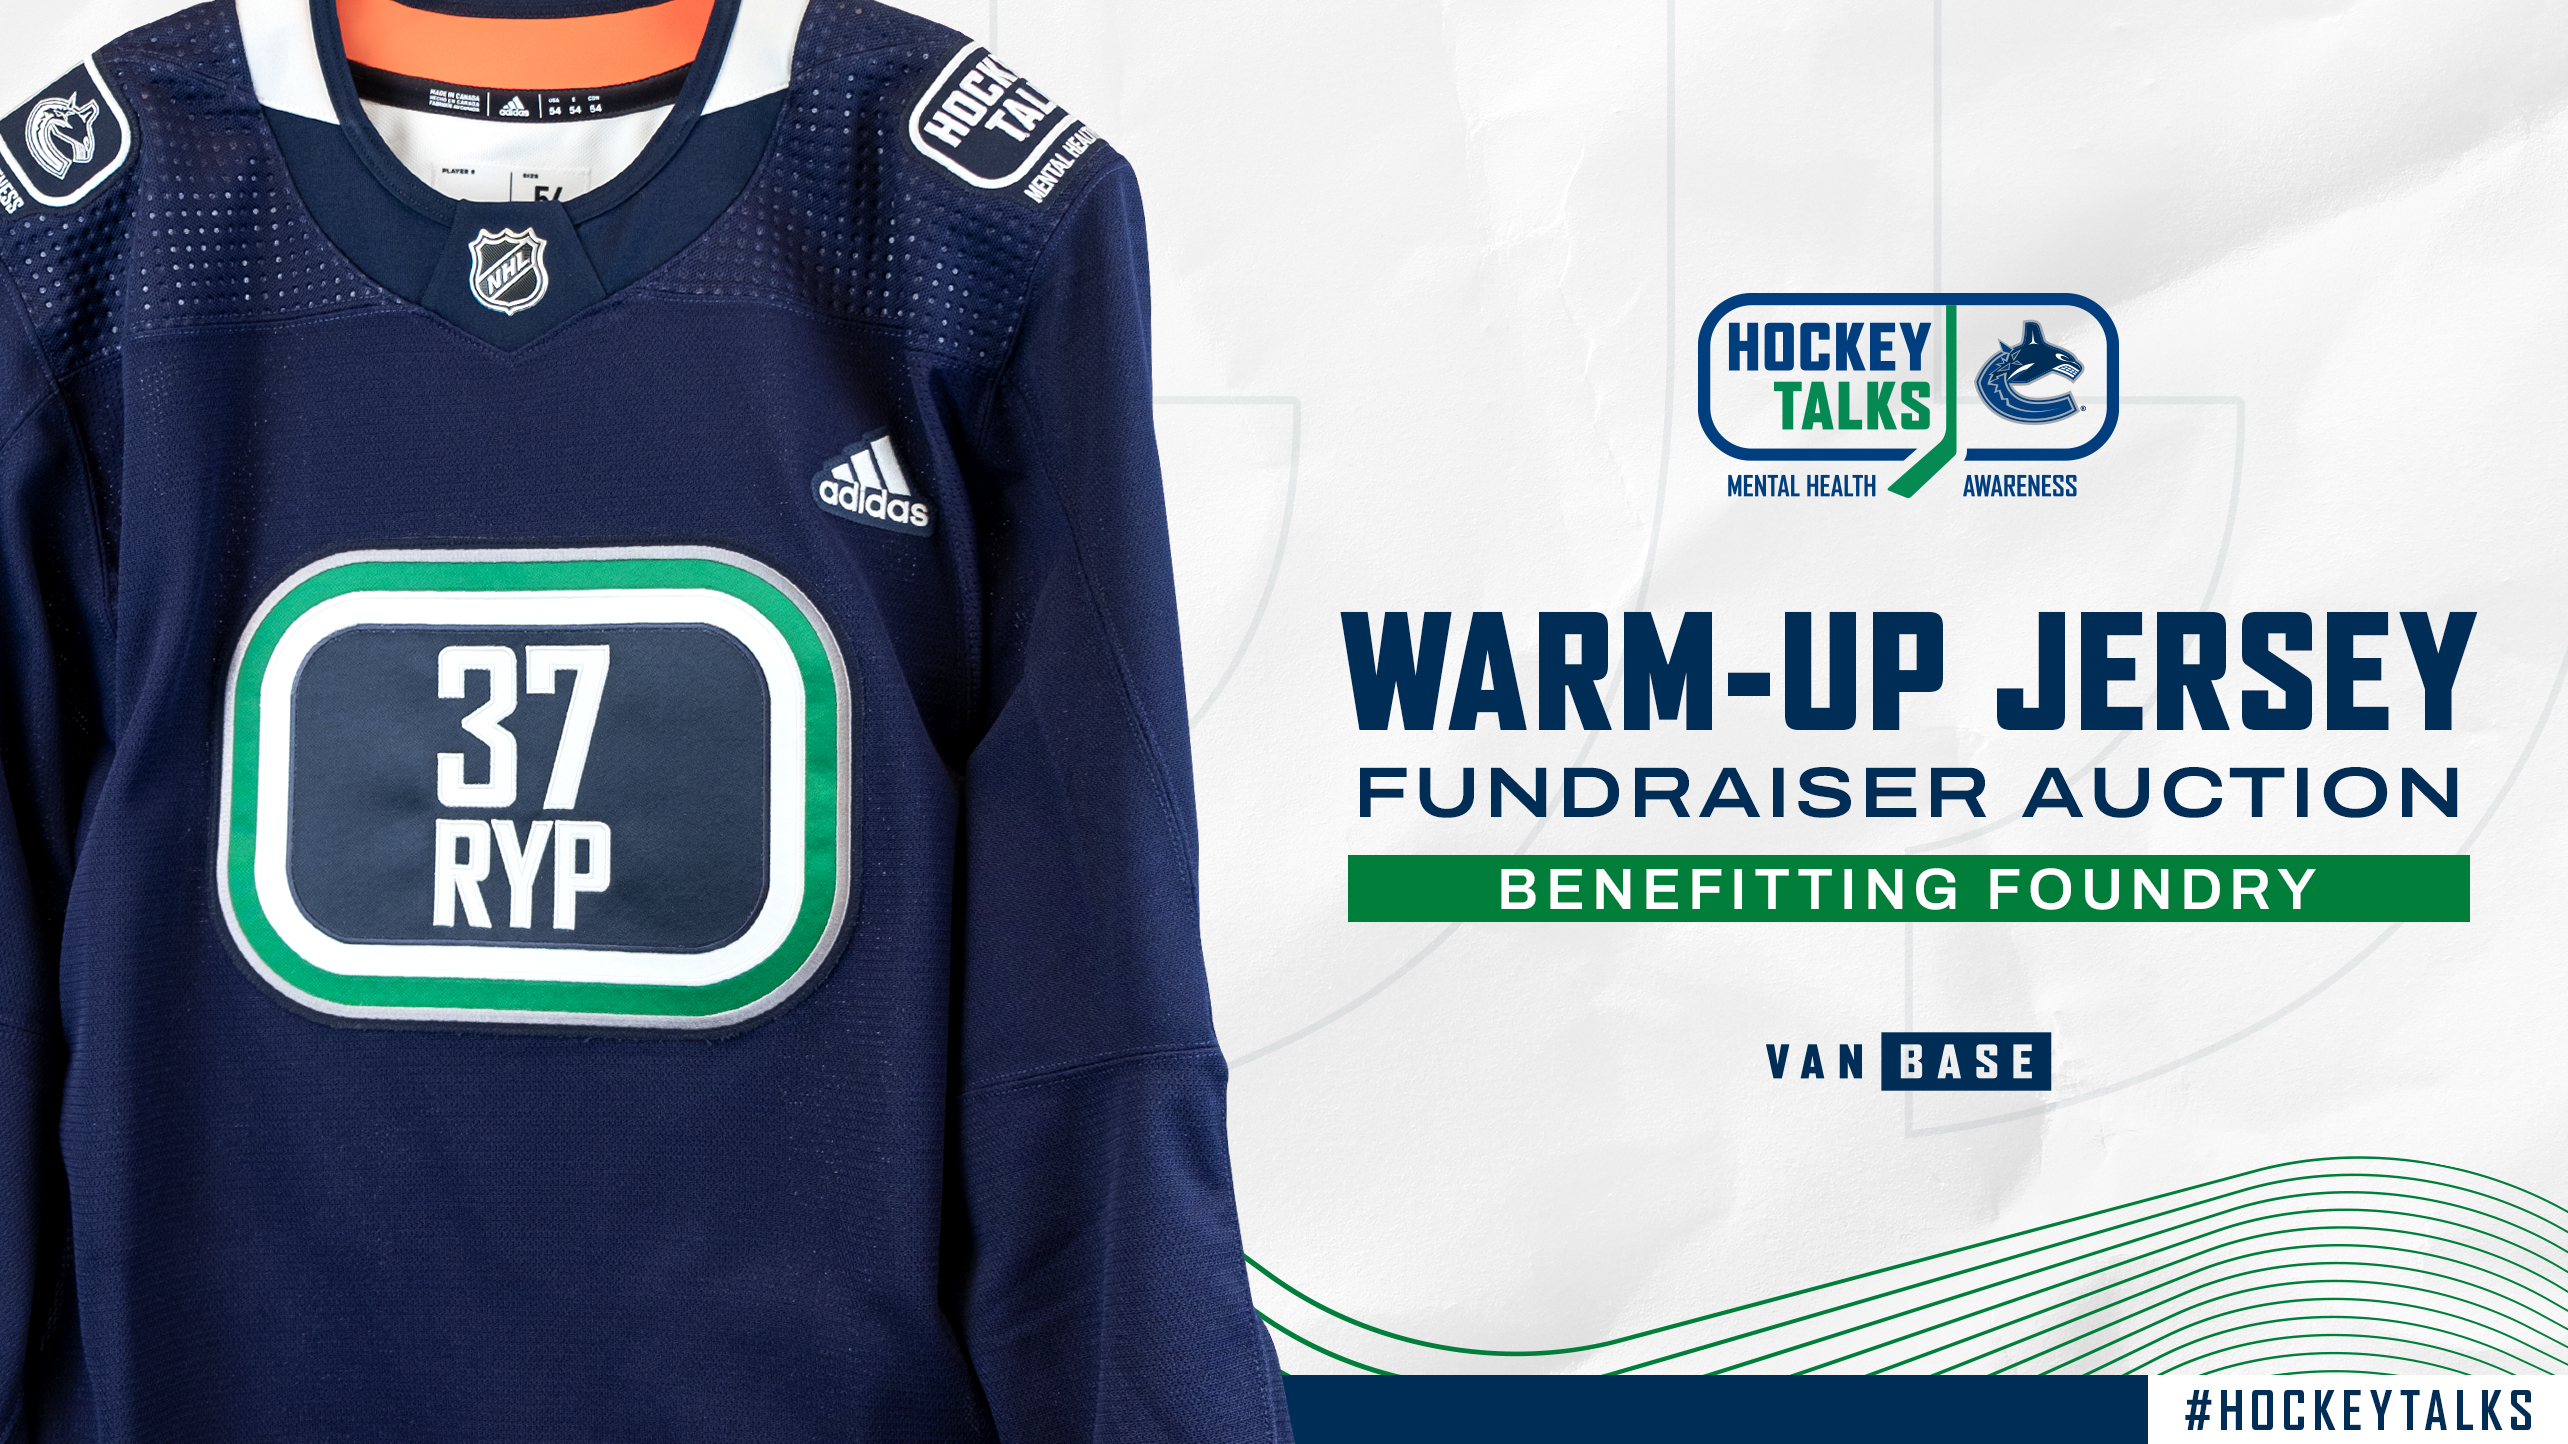 Our warm up jersey auction for tonight's @canucks game! In